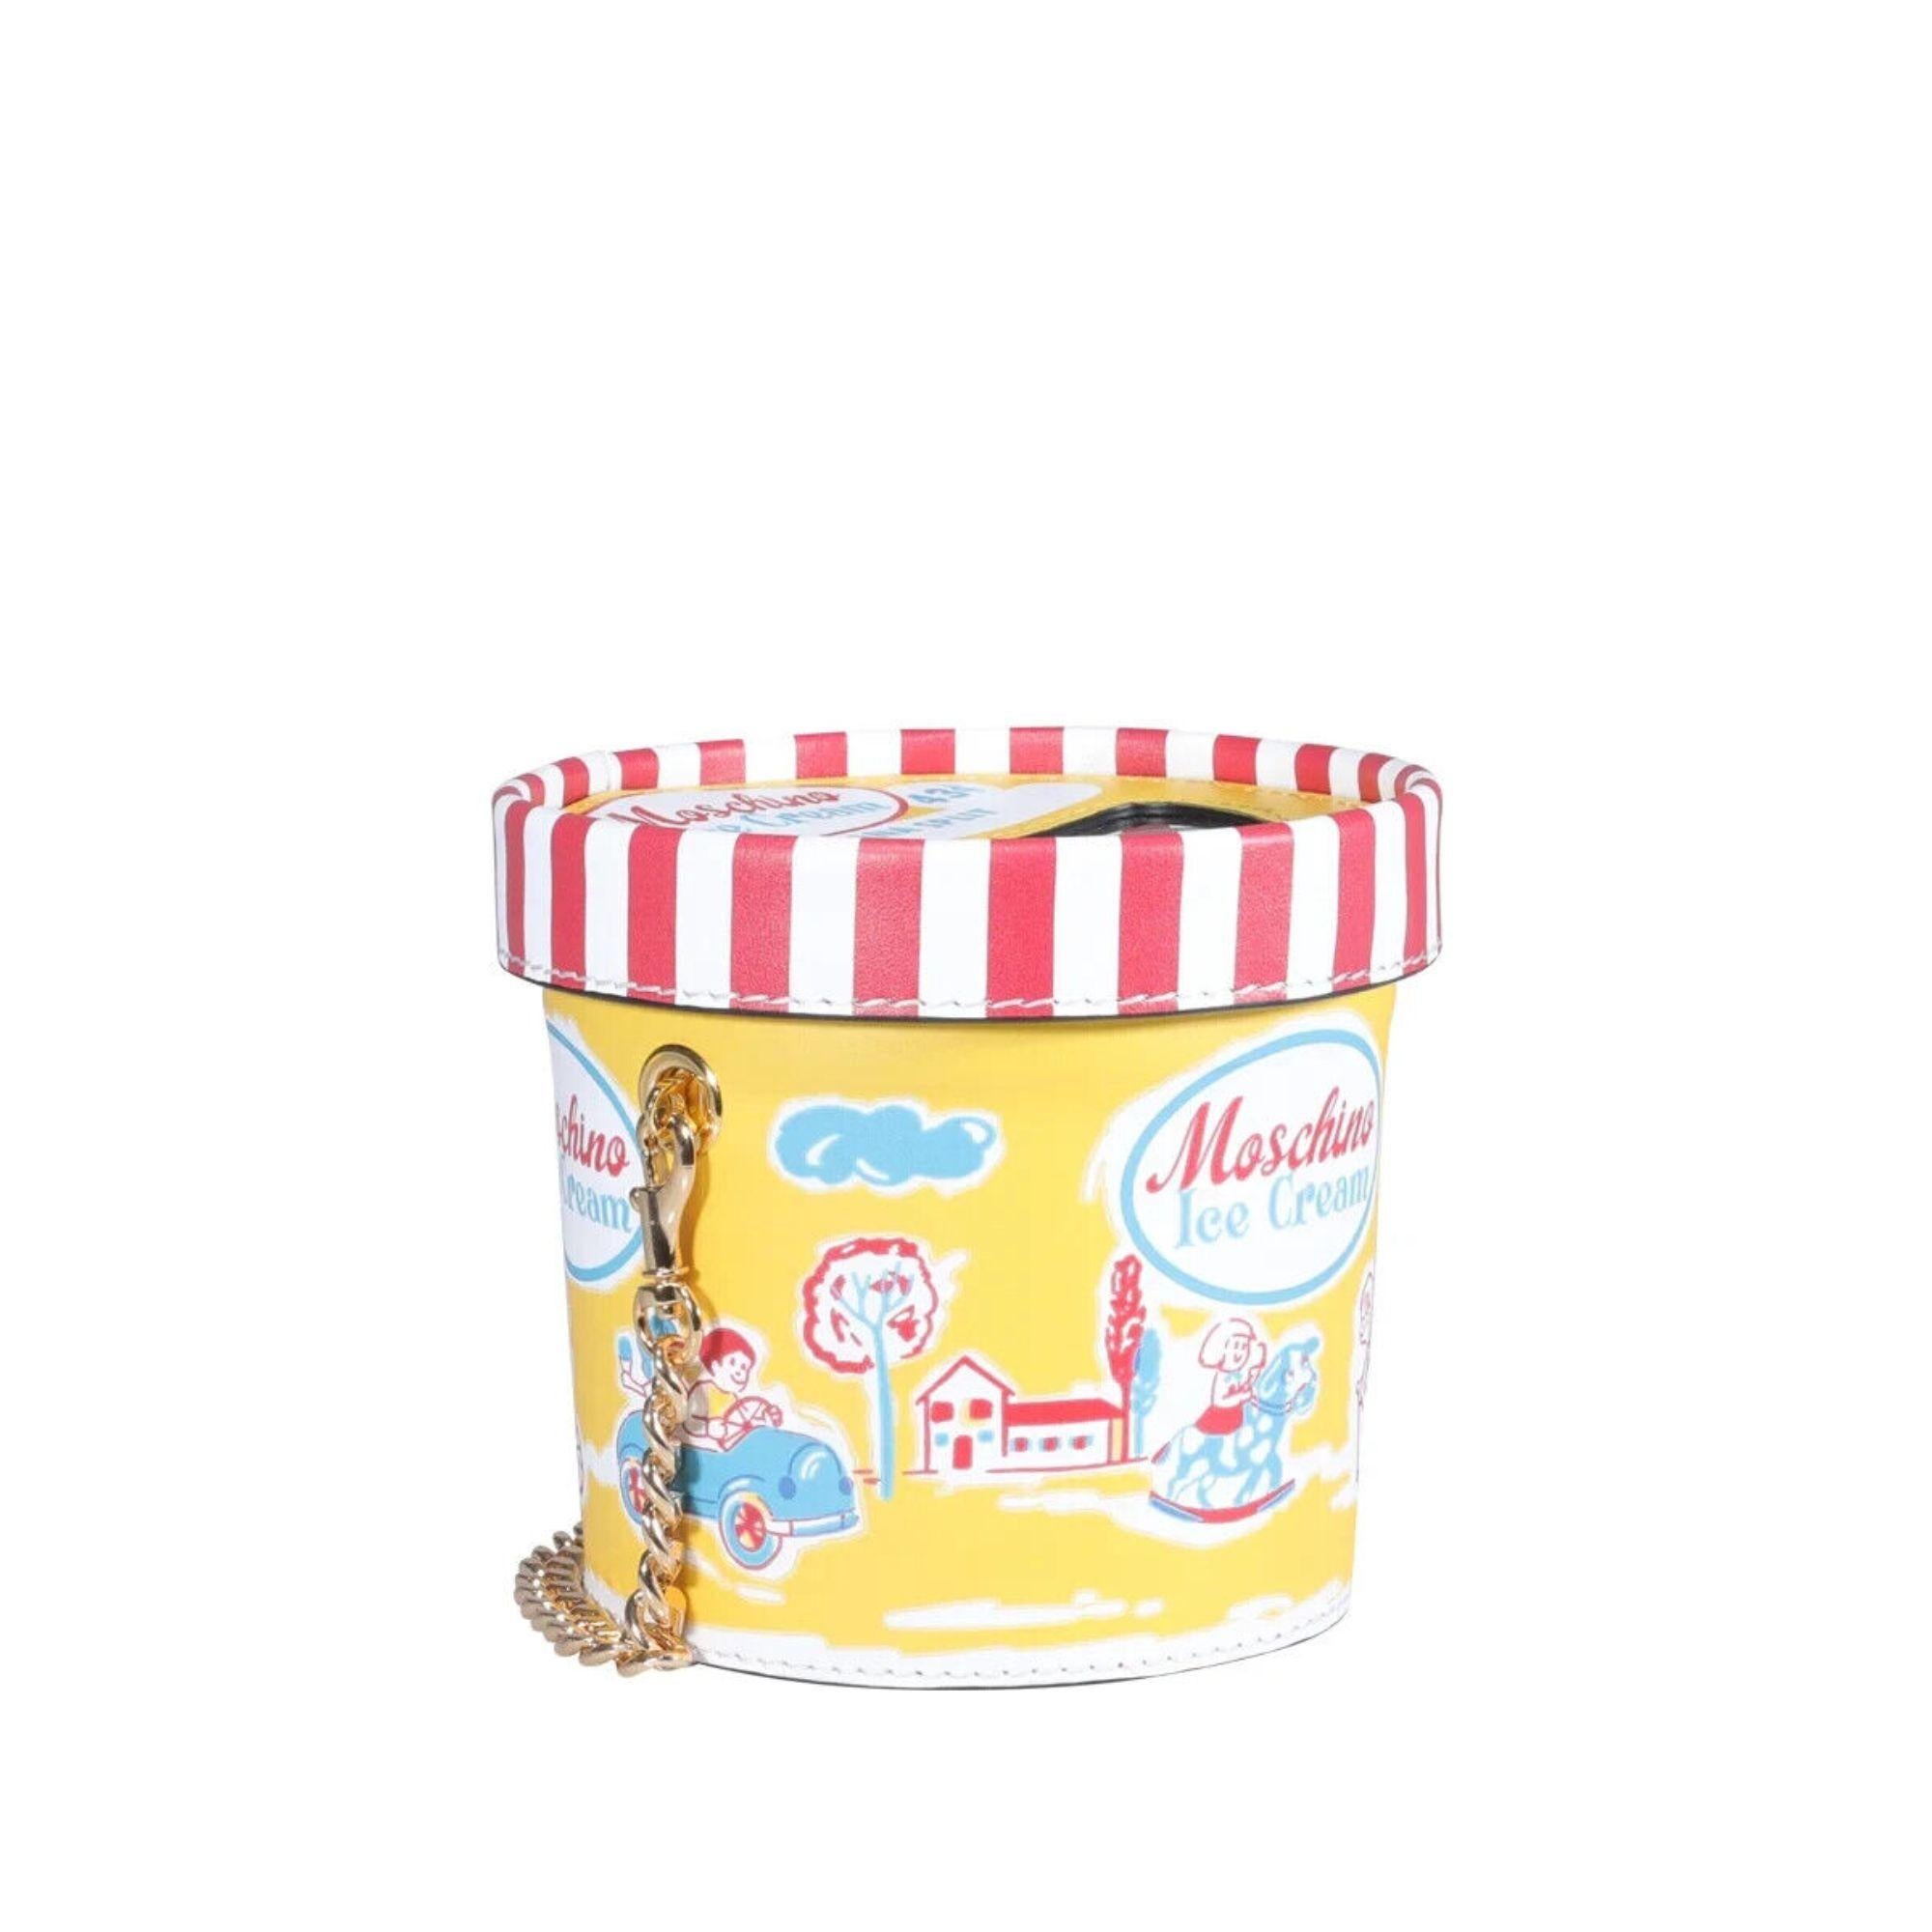 White SS22 Moschino Couture Banana Split Icecream Pint Leather Shoulder Bag For Sale